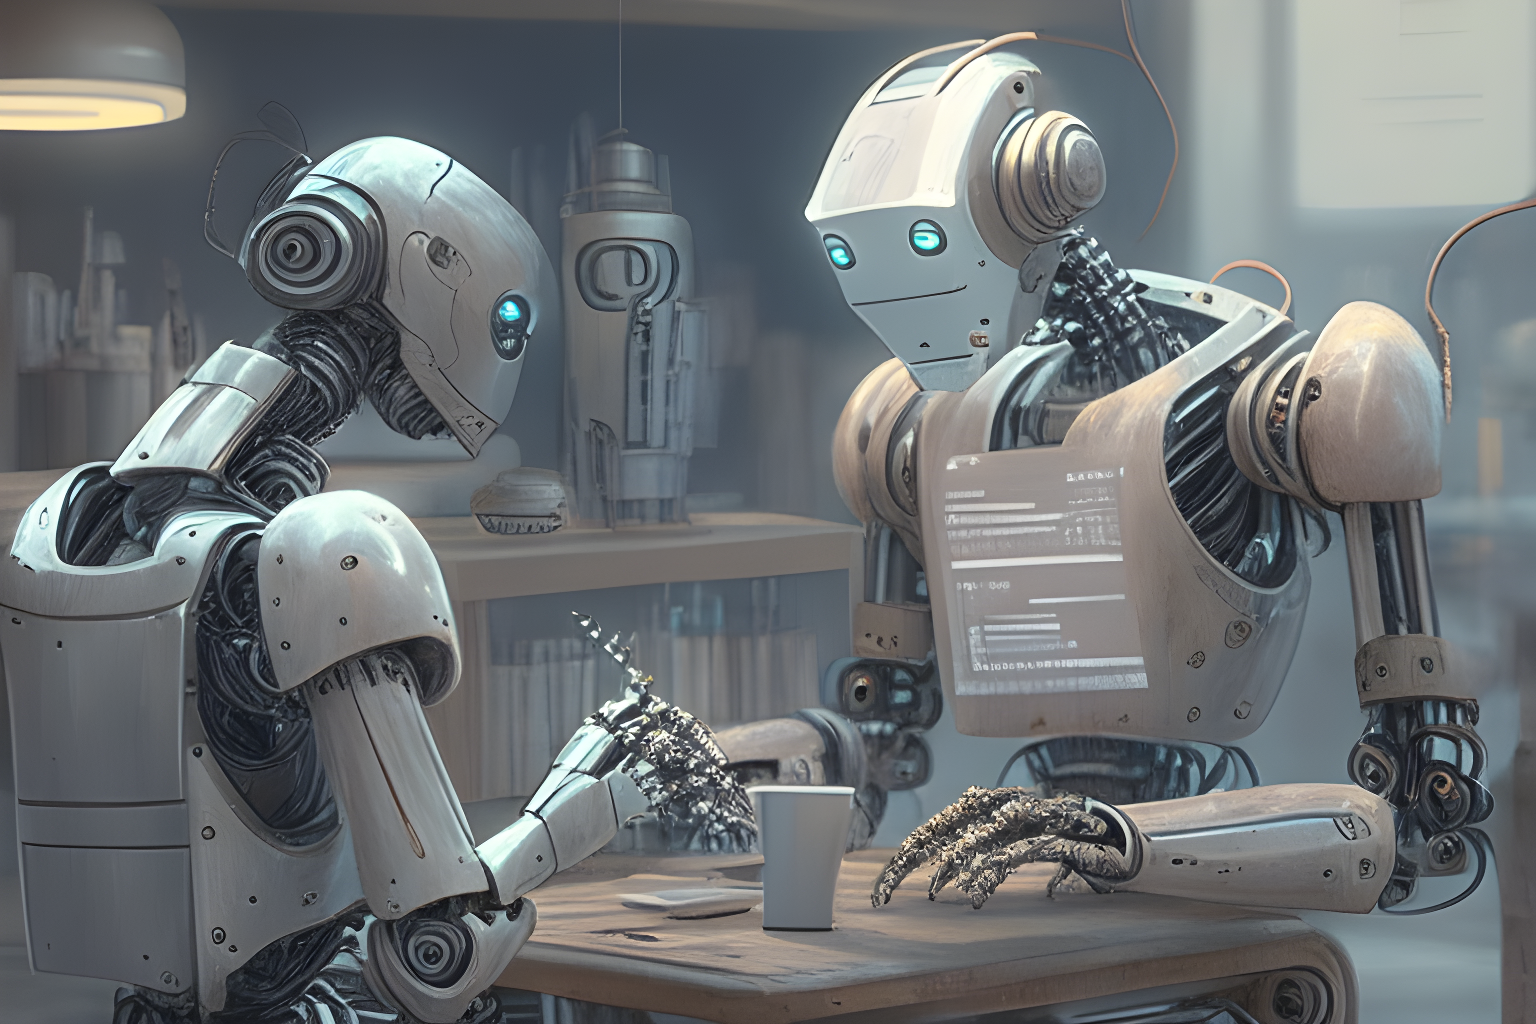 illustrate a humanoid robot performing a trade